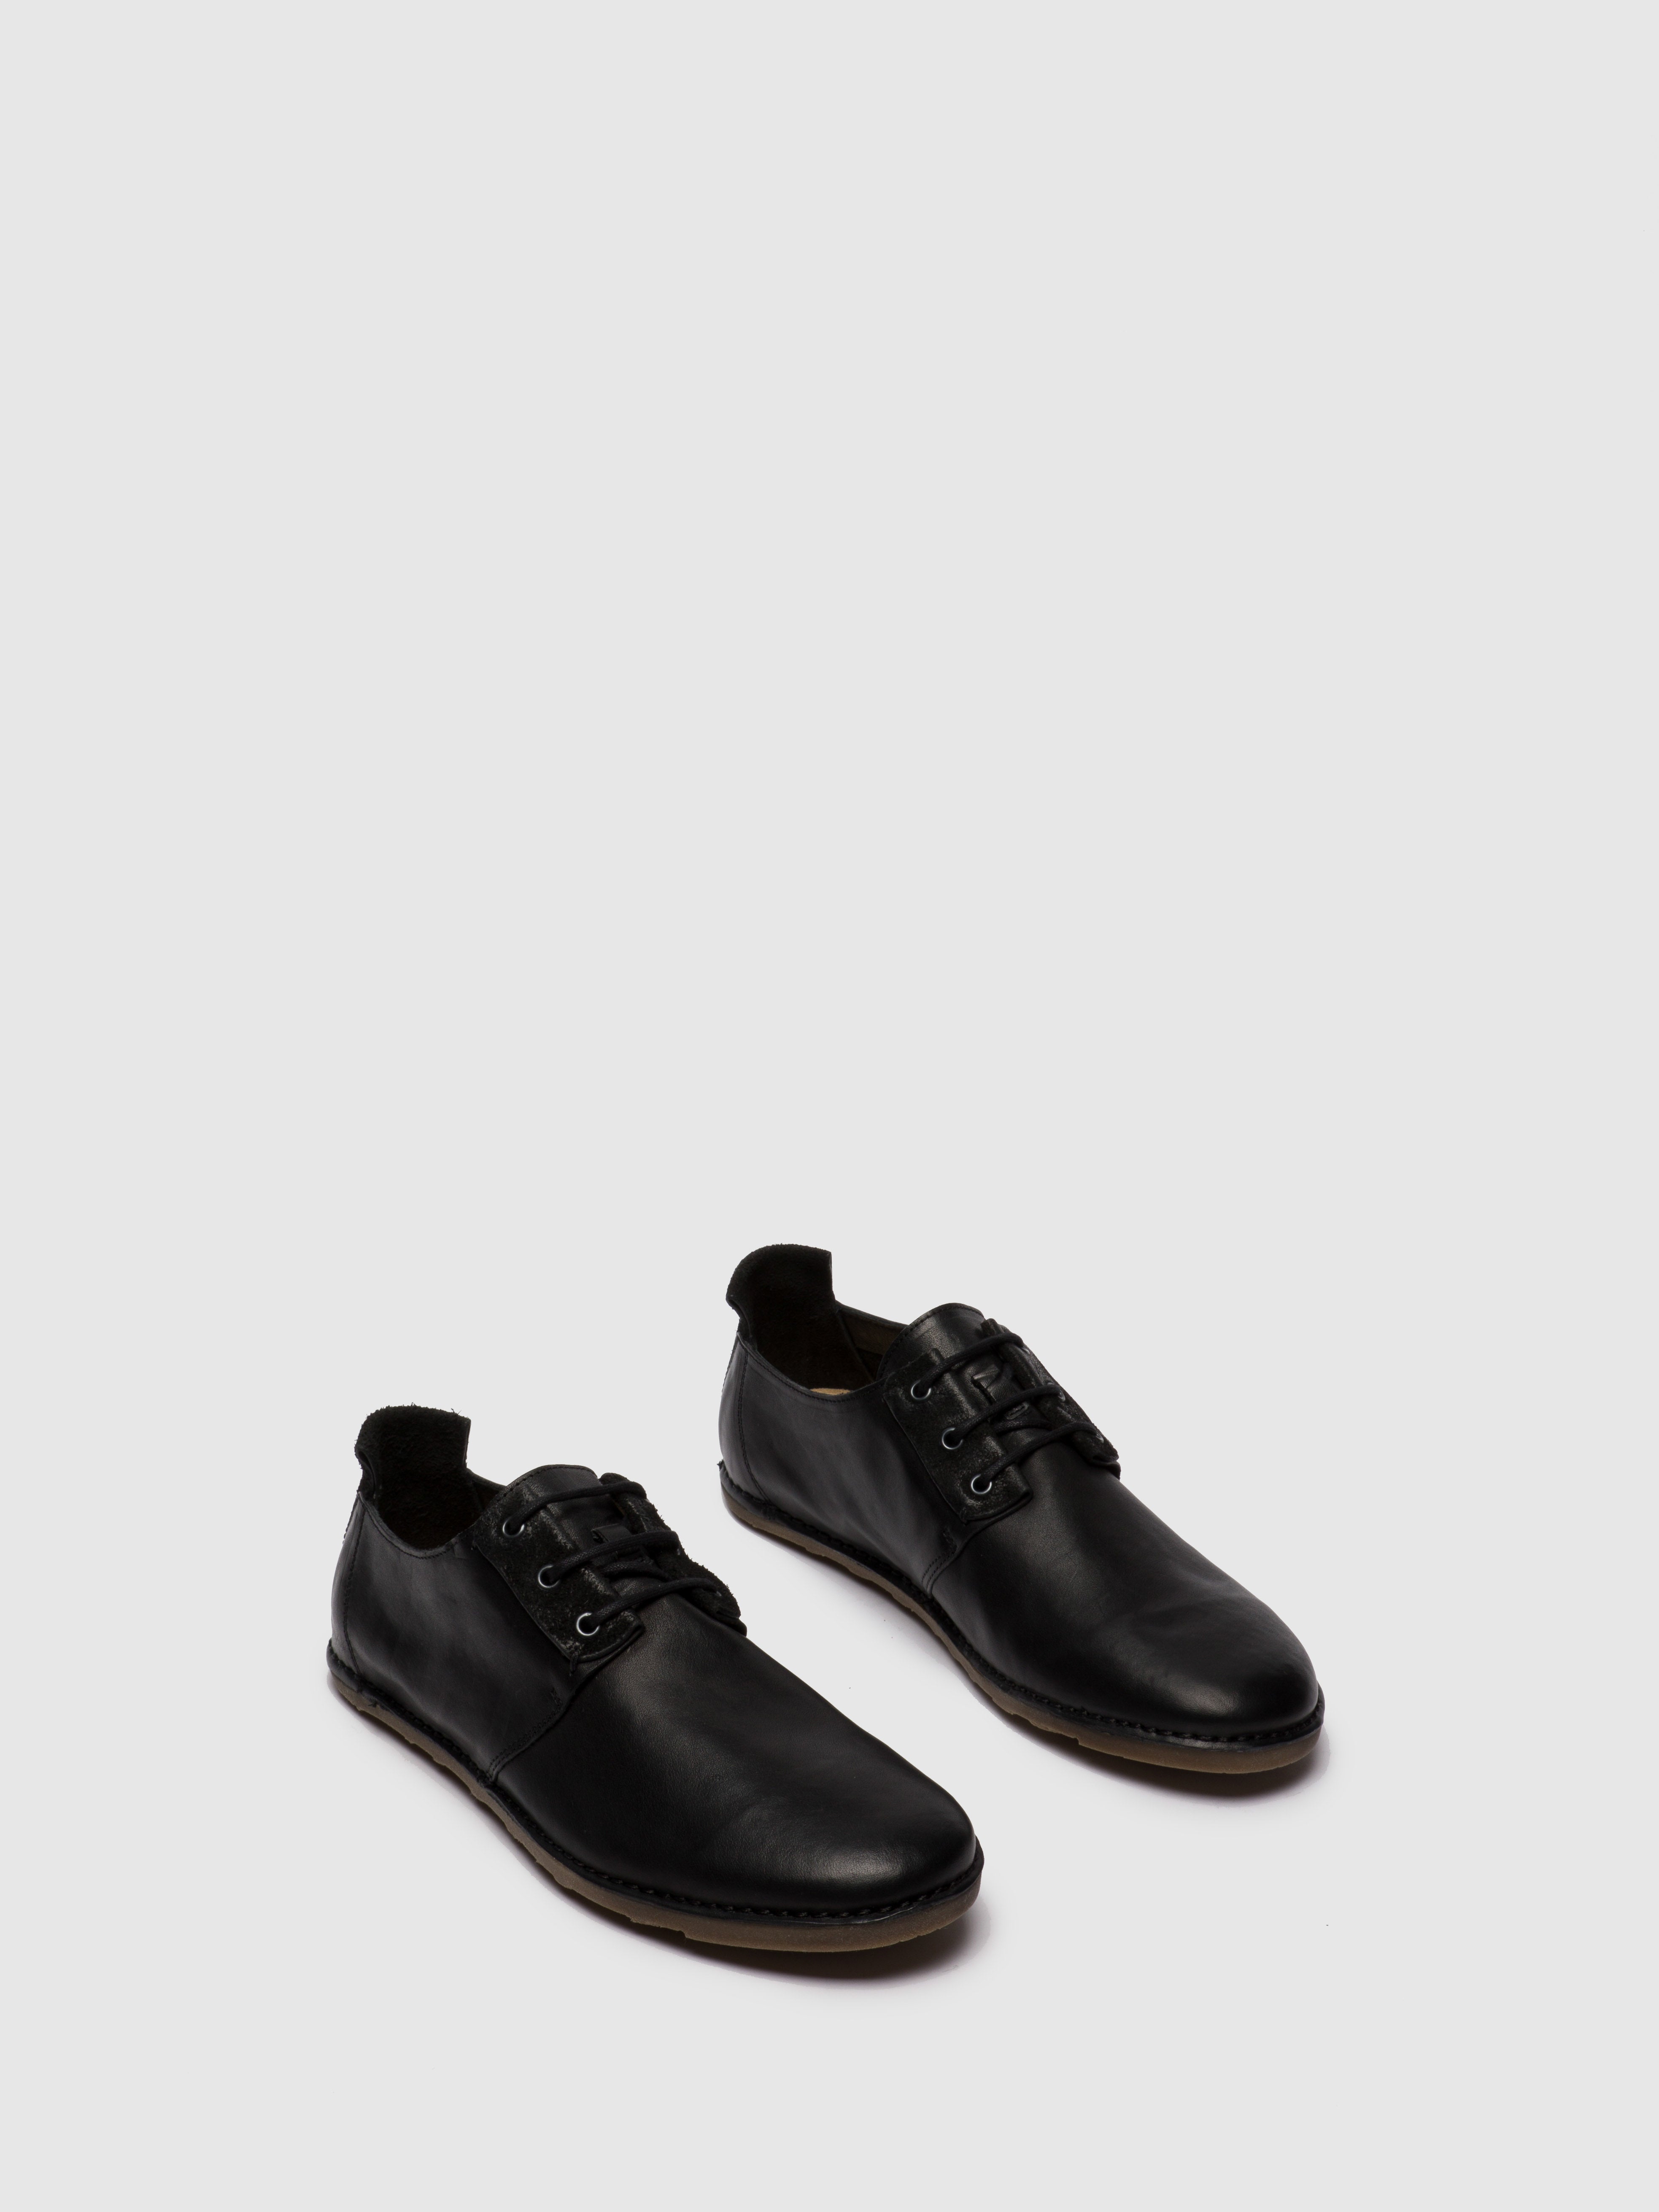 Fly London Black Lace-up Shoes